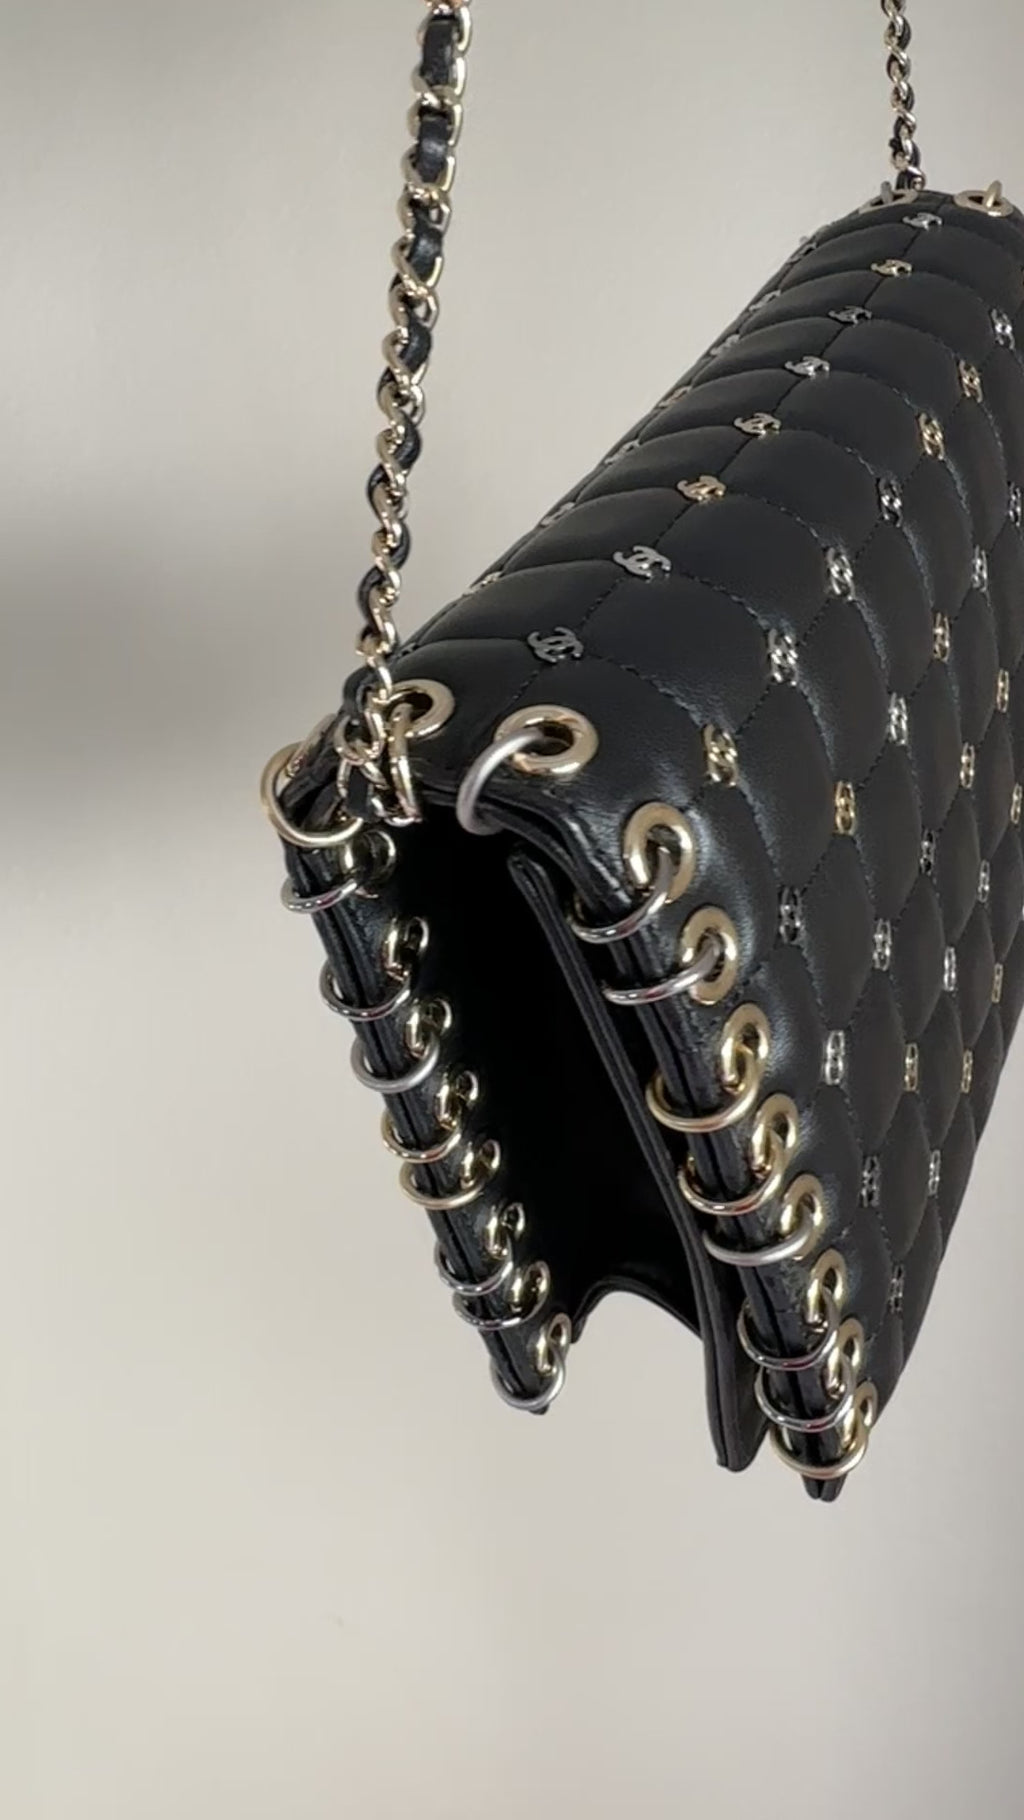 Buy Black Stone Heart Shaped Studded Bag by BAG HEAD Online at Aza Fashions.